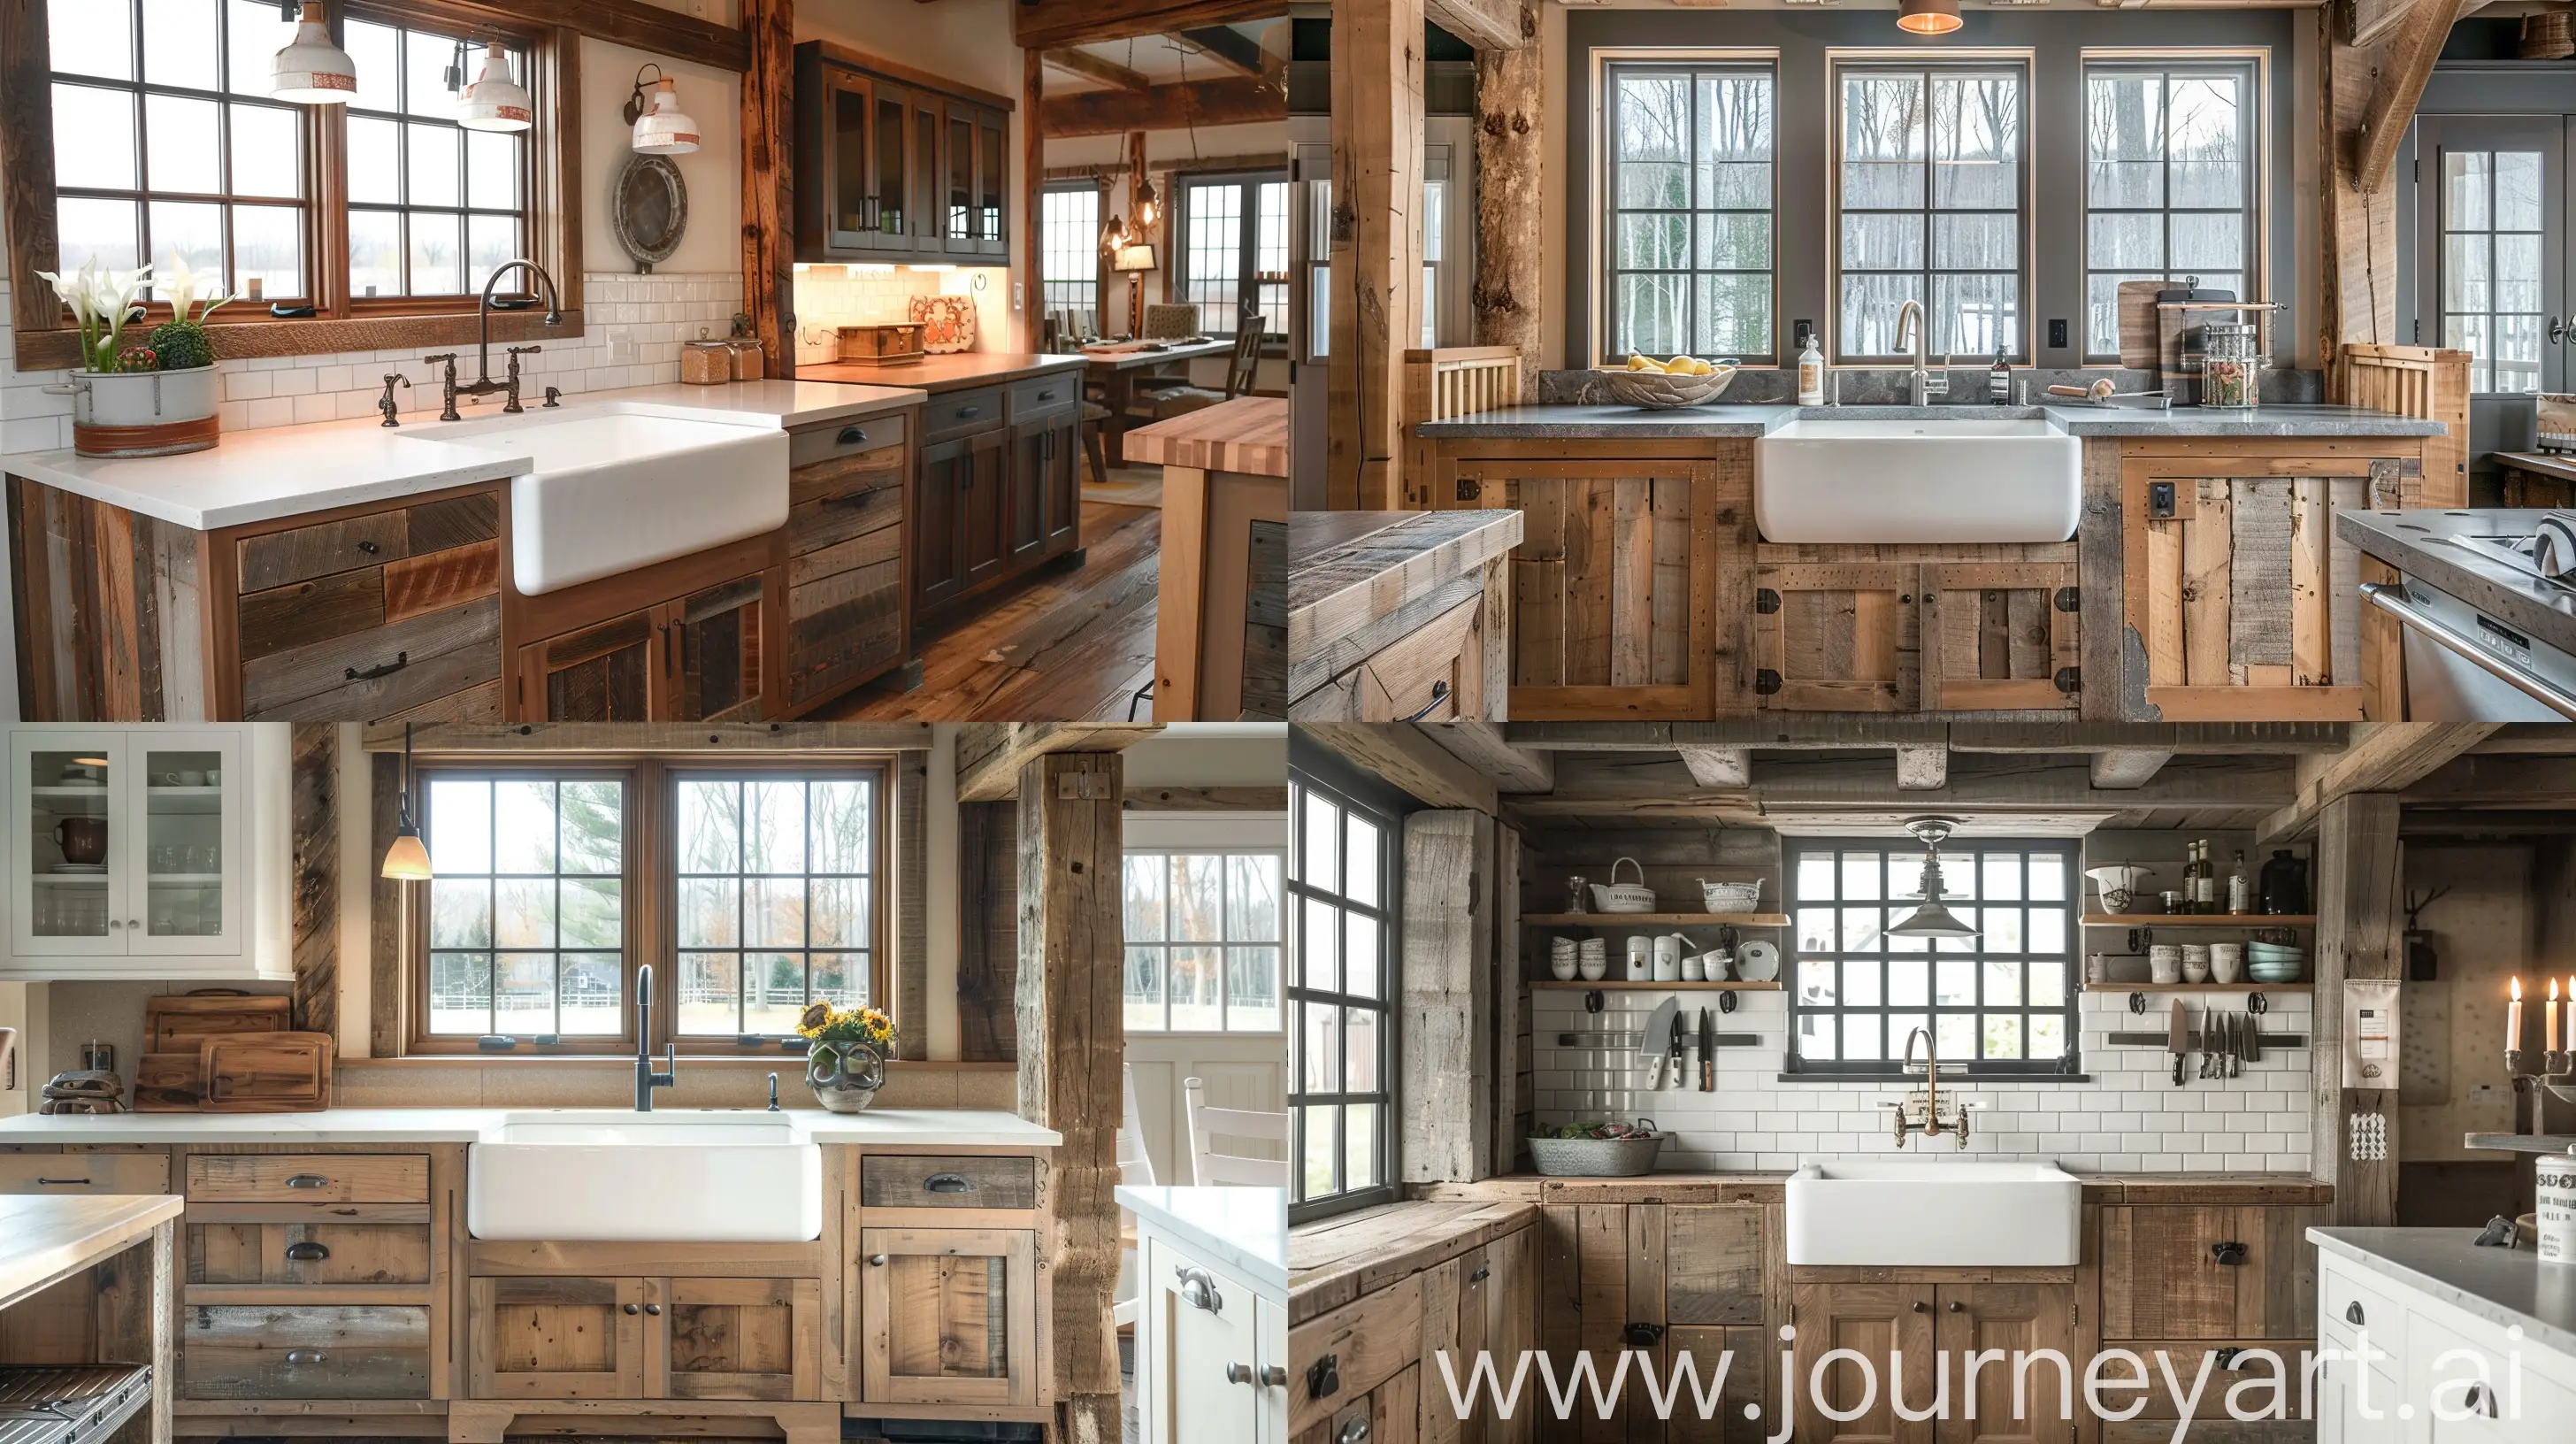 Rustic-Farmhouse-Kitchen-Design-with-Barnwood-Cabinets-and-Exposed-Beams